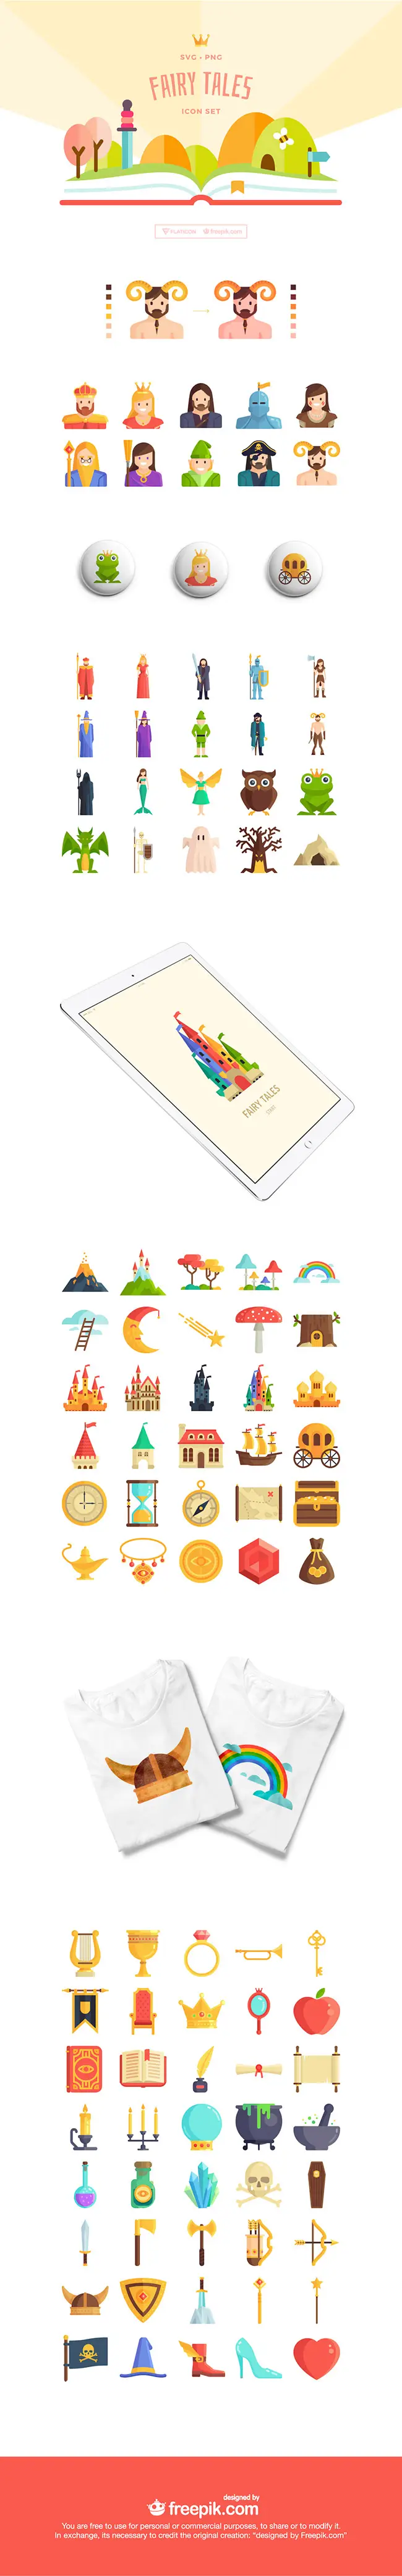 100 Free Fairy Tale themed icon set